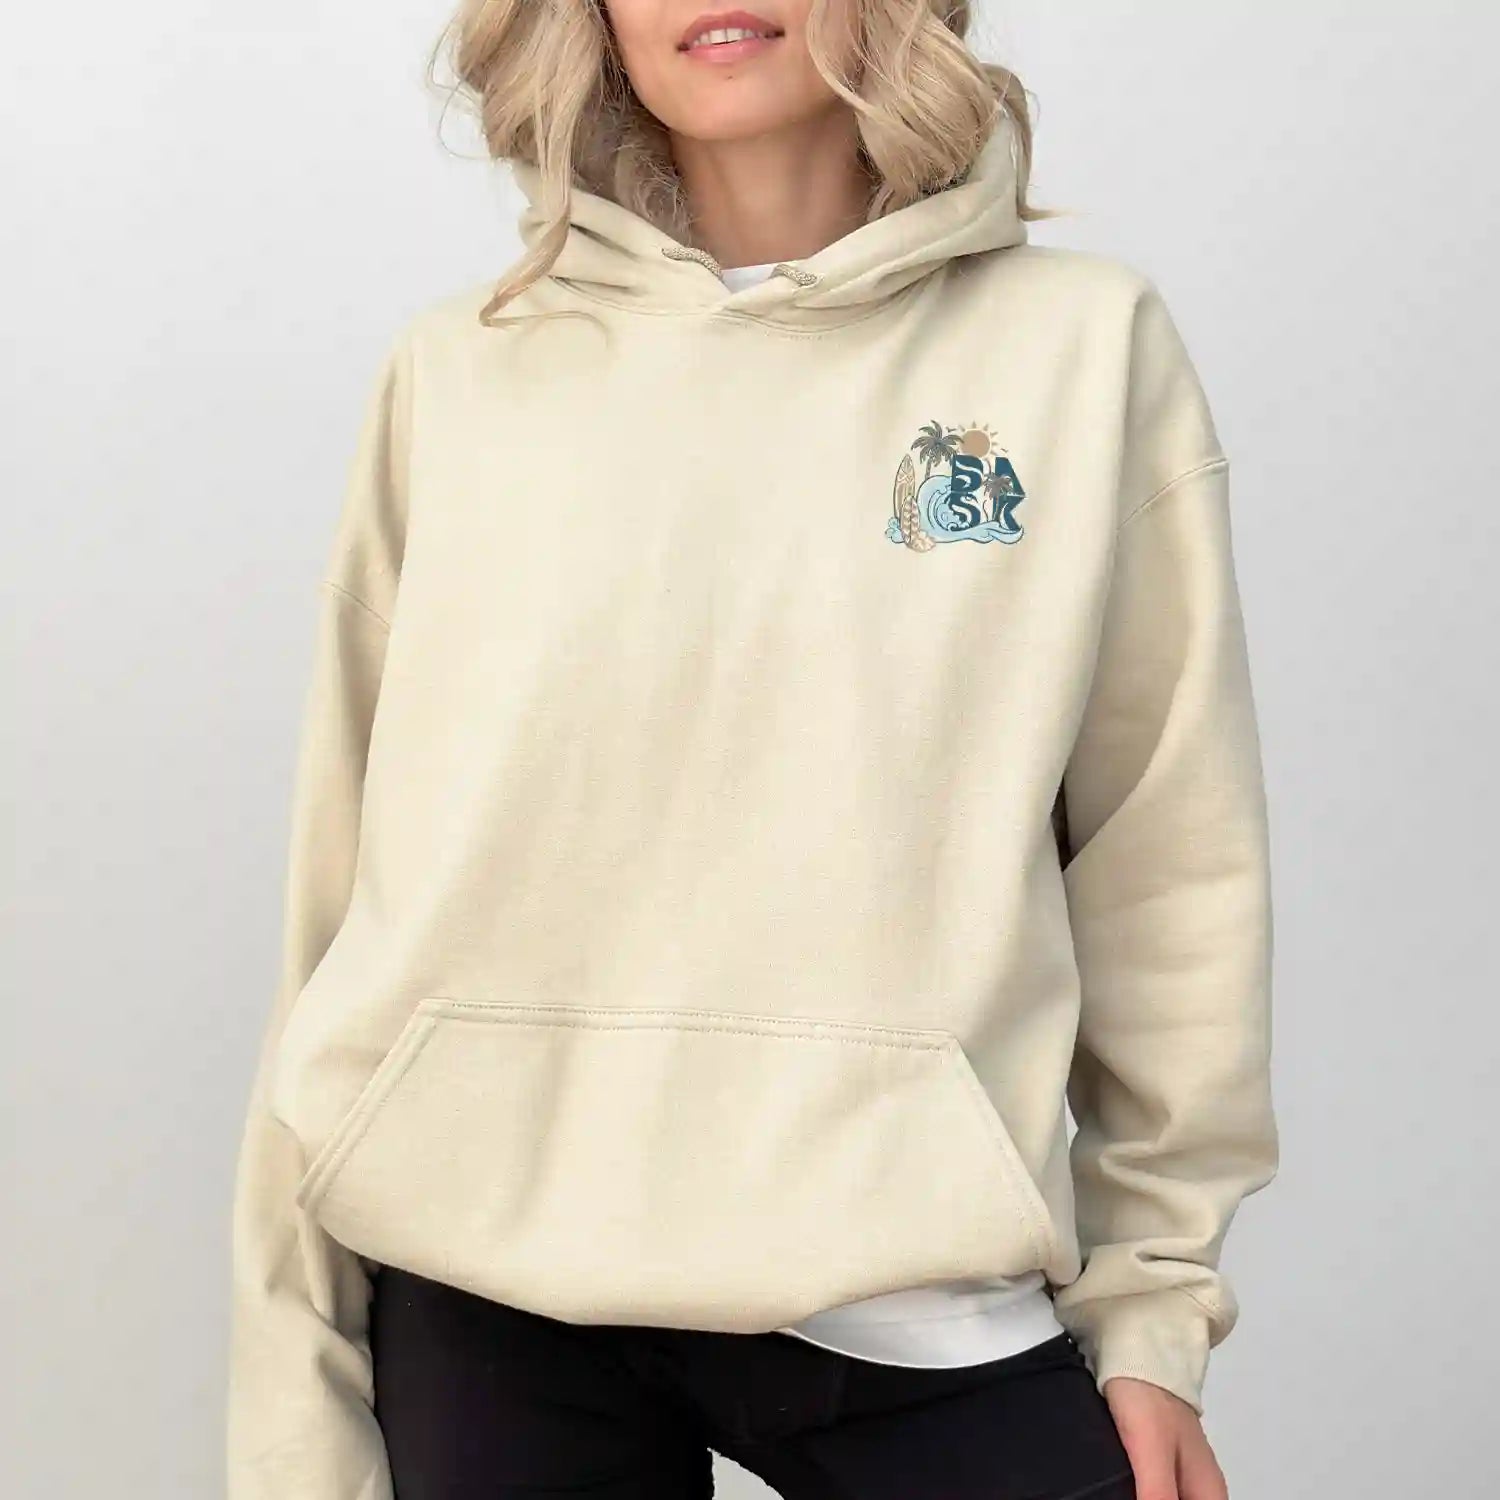 A woman wearing a beige Nalu o ka Mana (Waves of Faith) Hoodie by Be Still and Know, with an embroidered owl on it, showcasing the BSAK Logo.